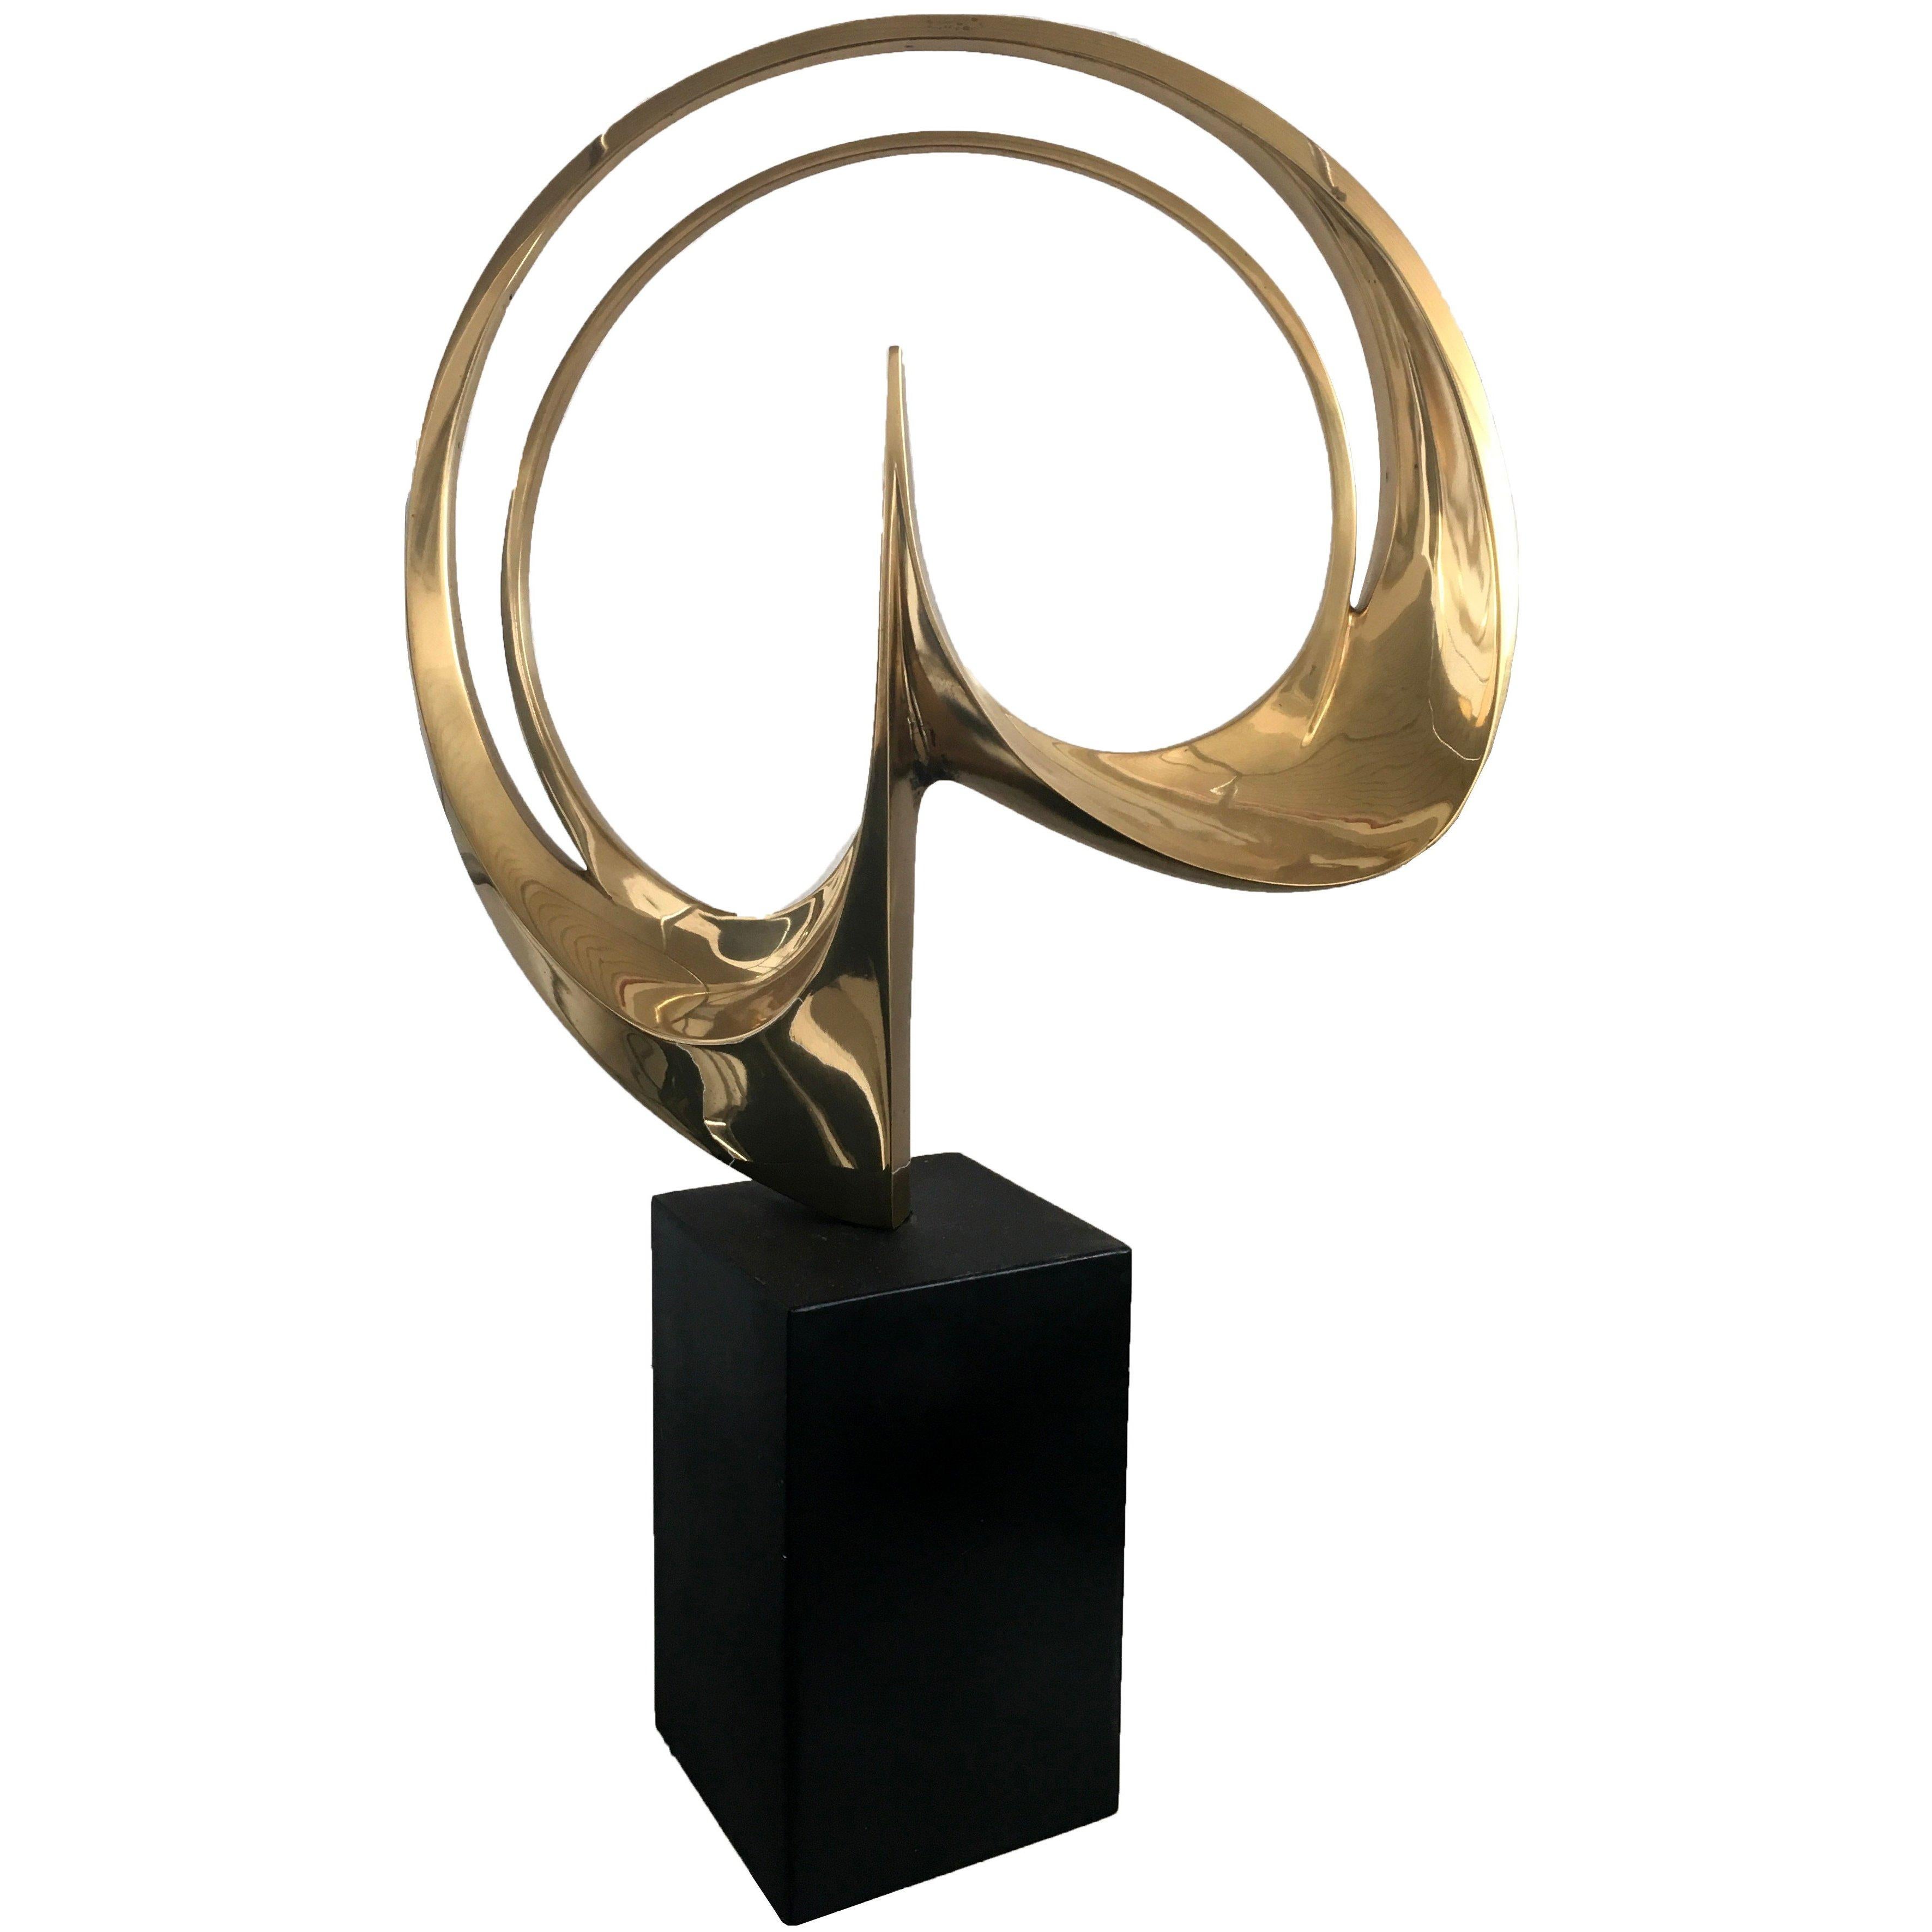 This Carmelo Cappello Abstract Sculpture is one of the identical 250 edited in 1974.
Bronze casting with polished finish. Black lacquered wood base. An original copy of the catalogue of the artist will be send with the sculpture.